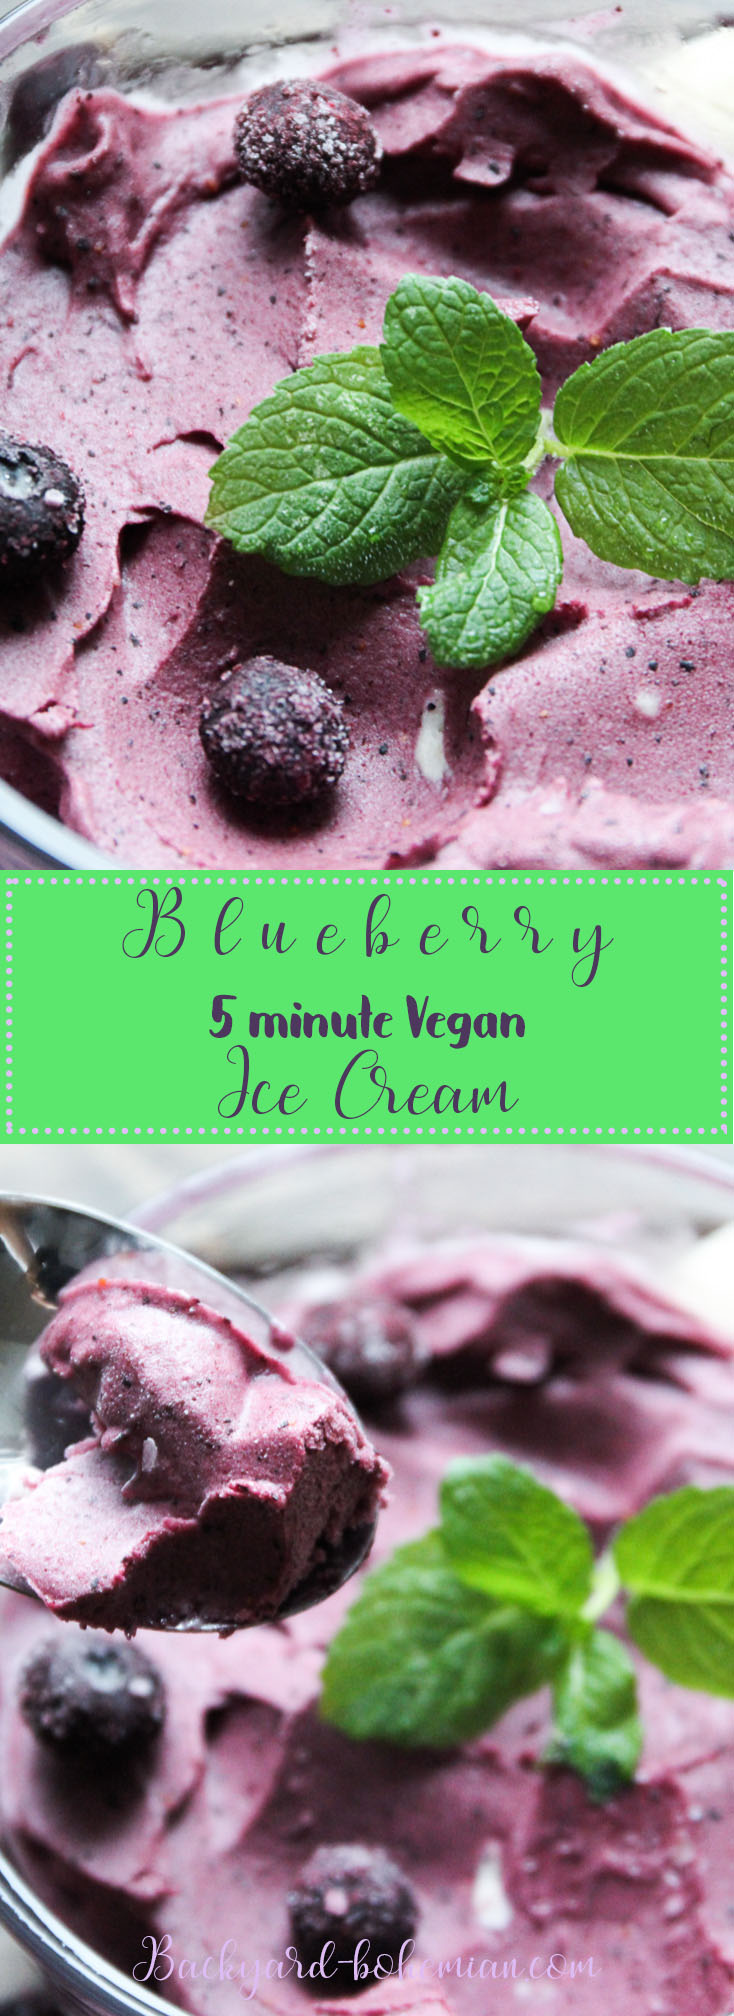 promo graphic for blueberry vegan ice cream featuring a background image of the purple colored ice cream